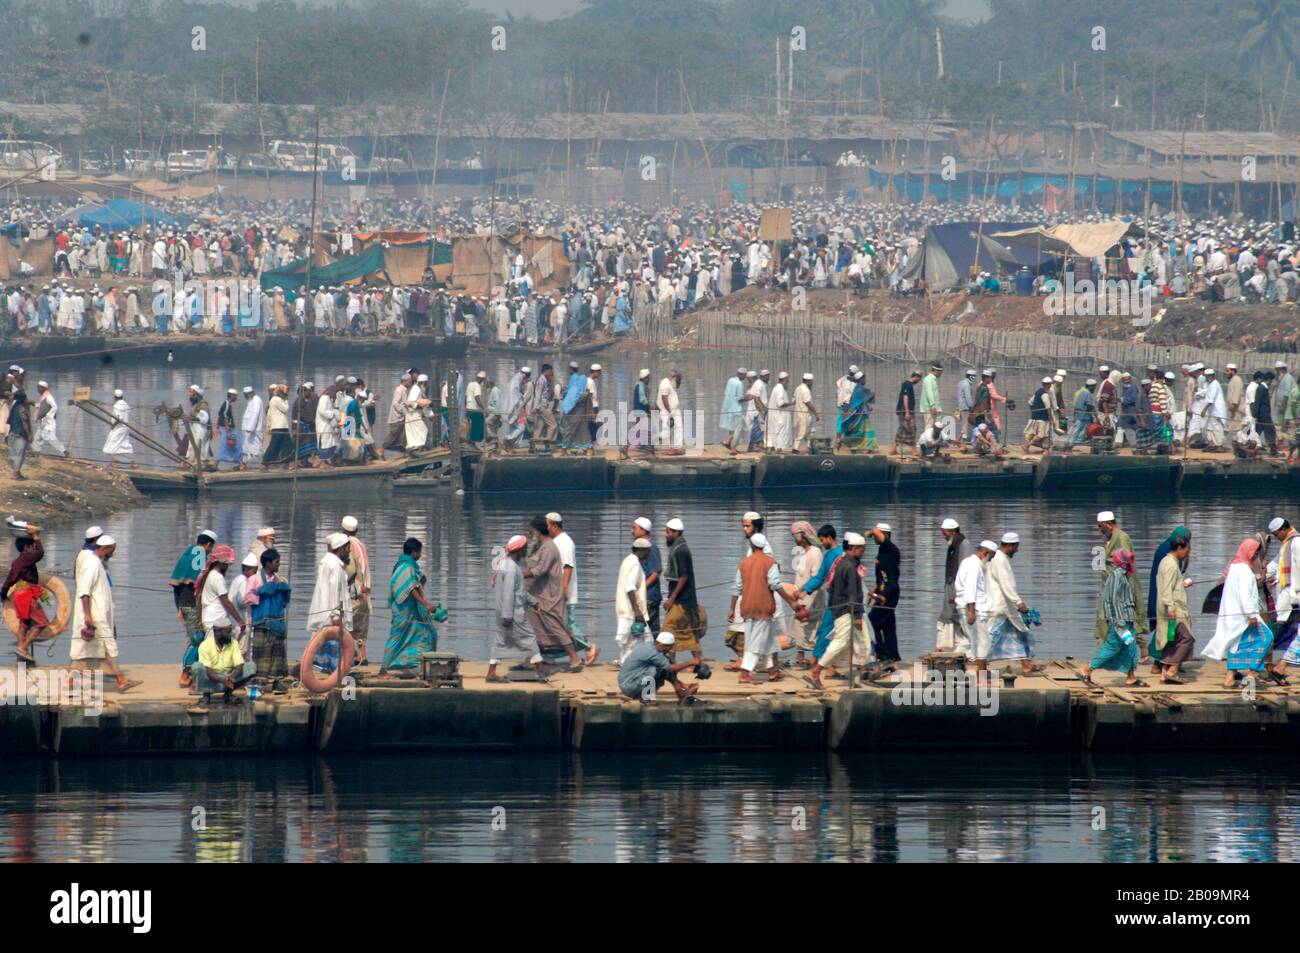 Devotees walk across makeshift bridges to participate in the annual Bishwa Ijtema on the bank of the Turag river in Tongi. Bishwa Ijtema is the largest Muslim Pilgrimage after Haj, in which several million Muslims from around the world take part. Tongi, Dhaka, Bangladesh. January 31, 2009. Stock Photo